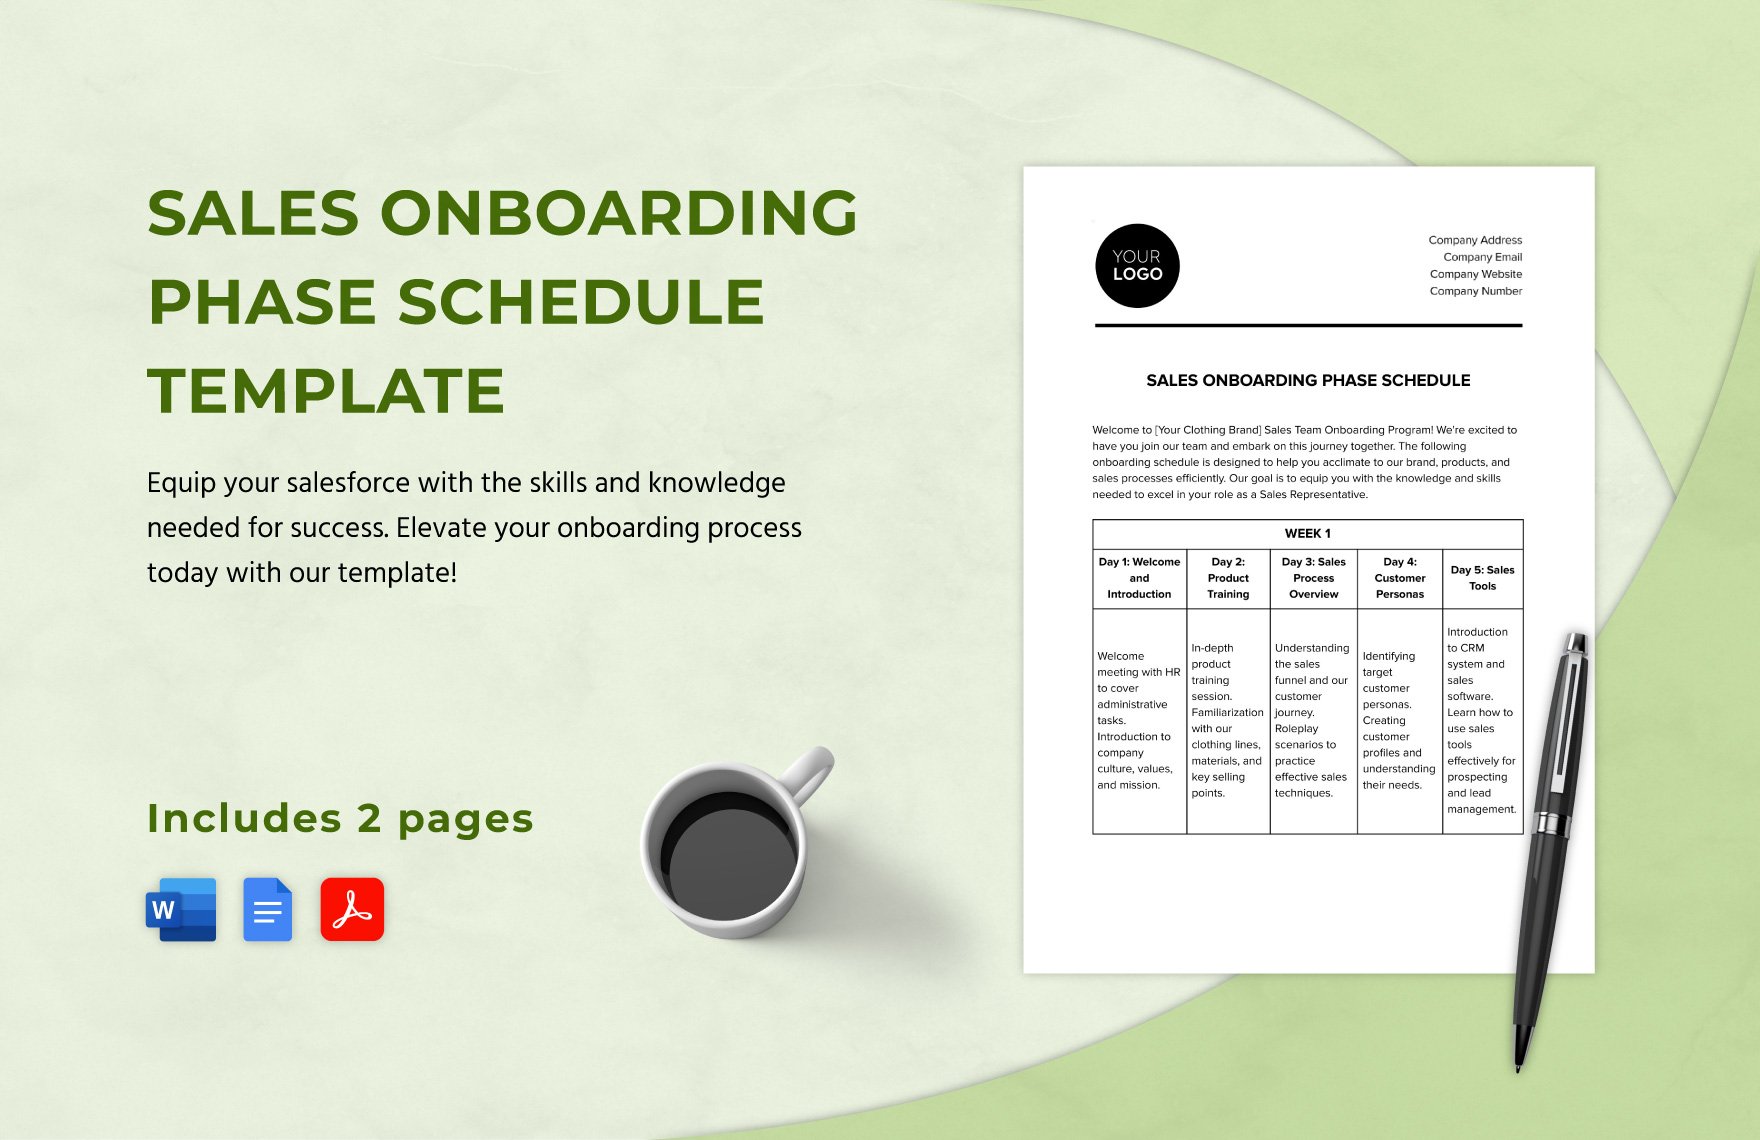 Sales Onboarding Phase Schedule Template